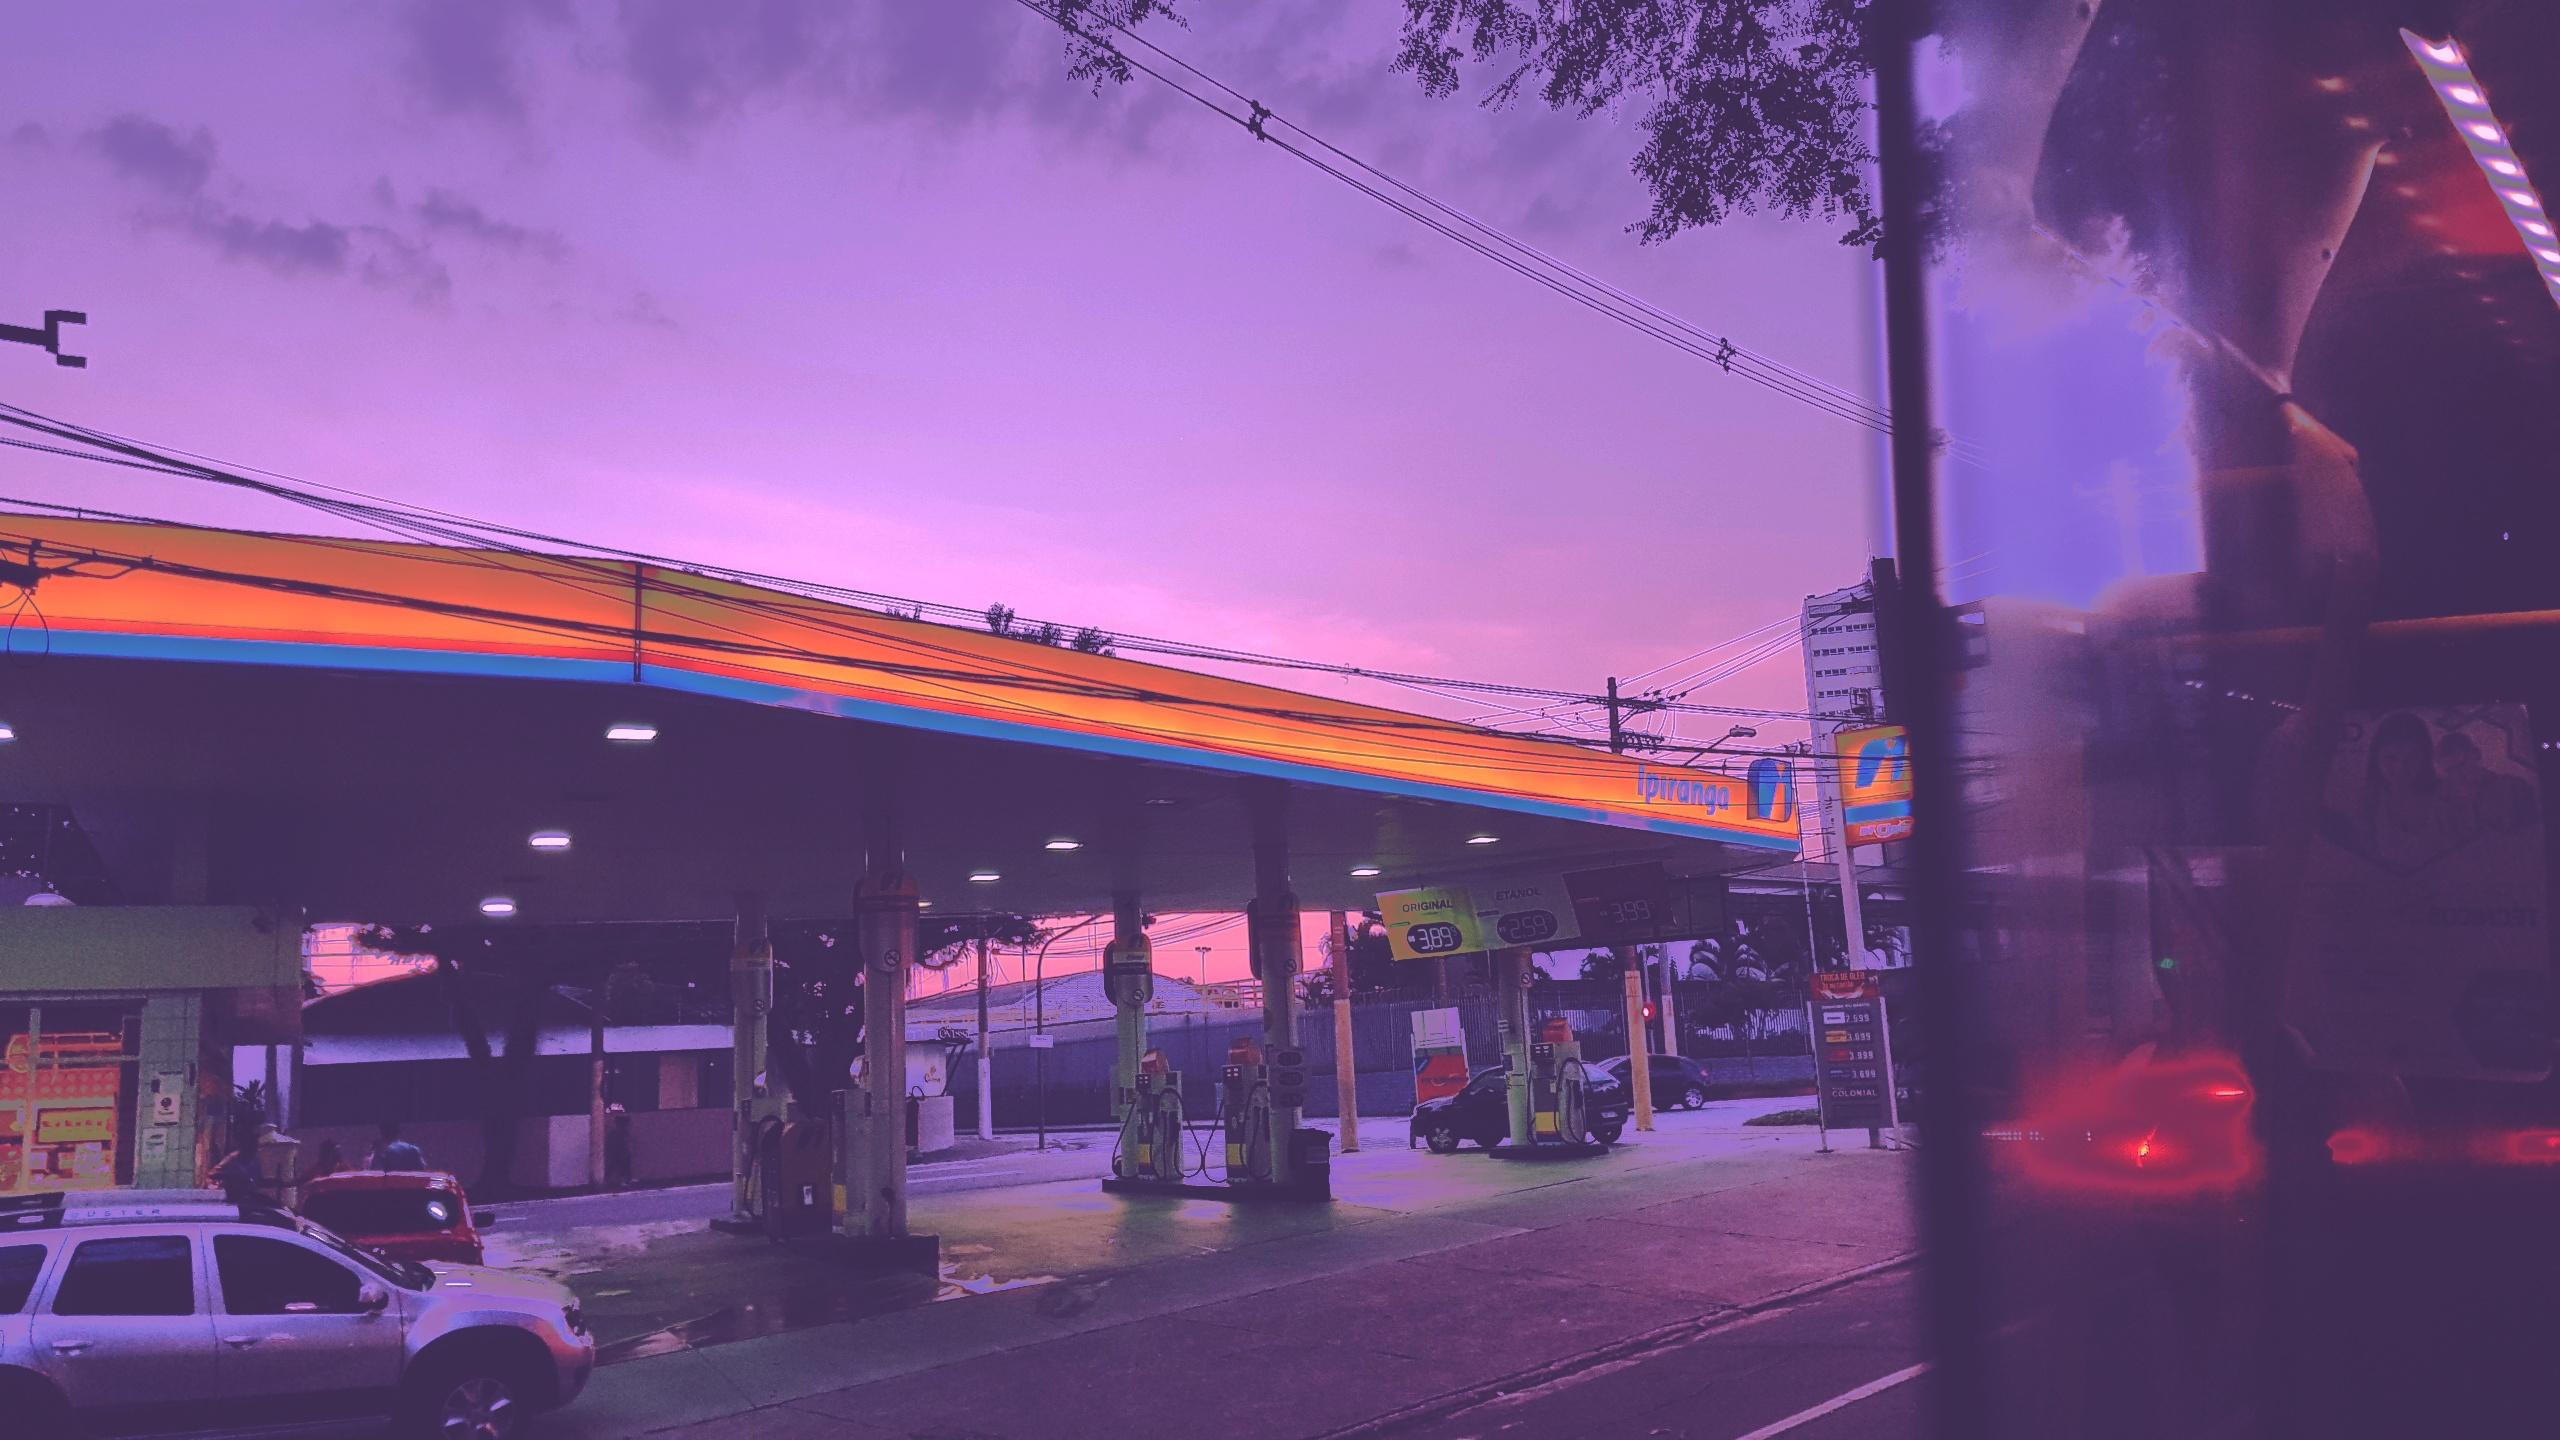 Some gas station in my city, edited to look purple: VaporwaveAesthetics